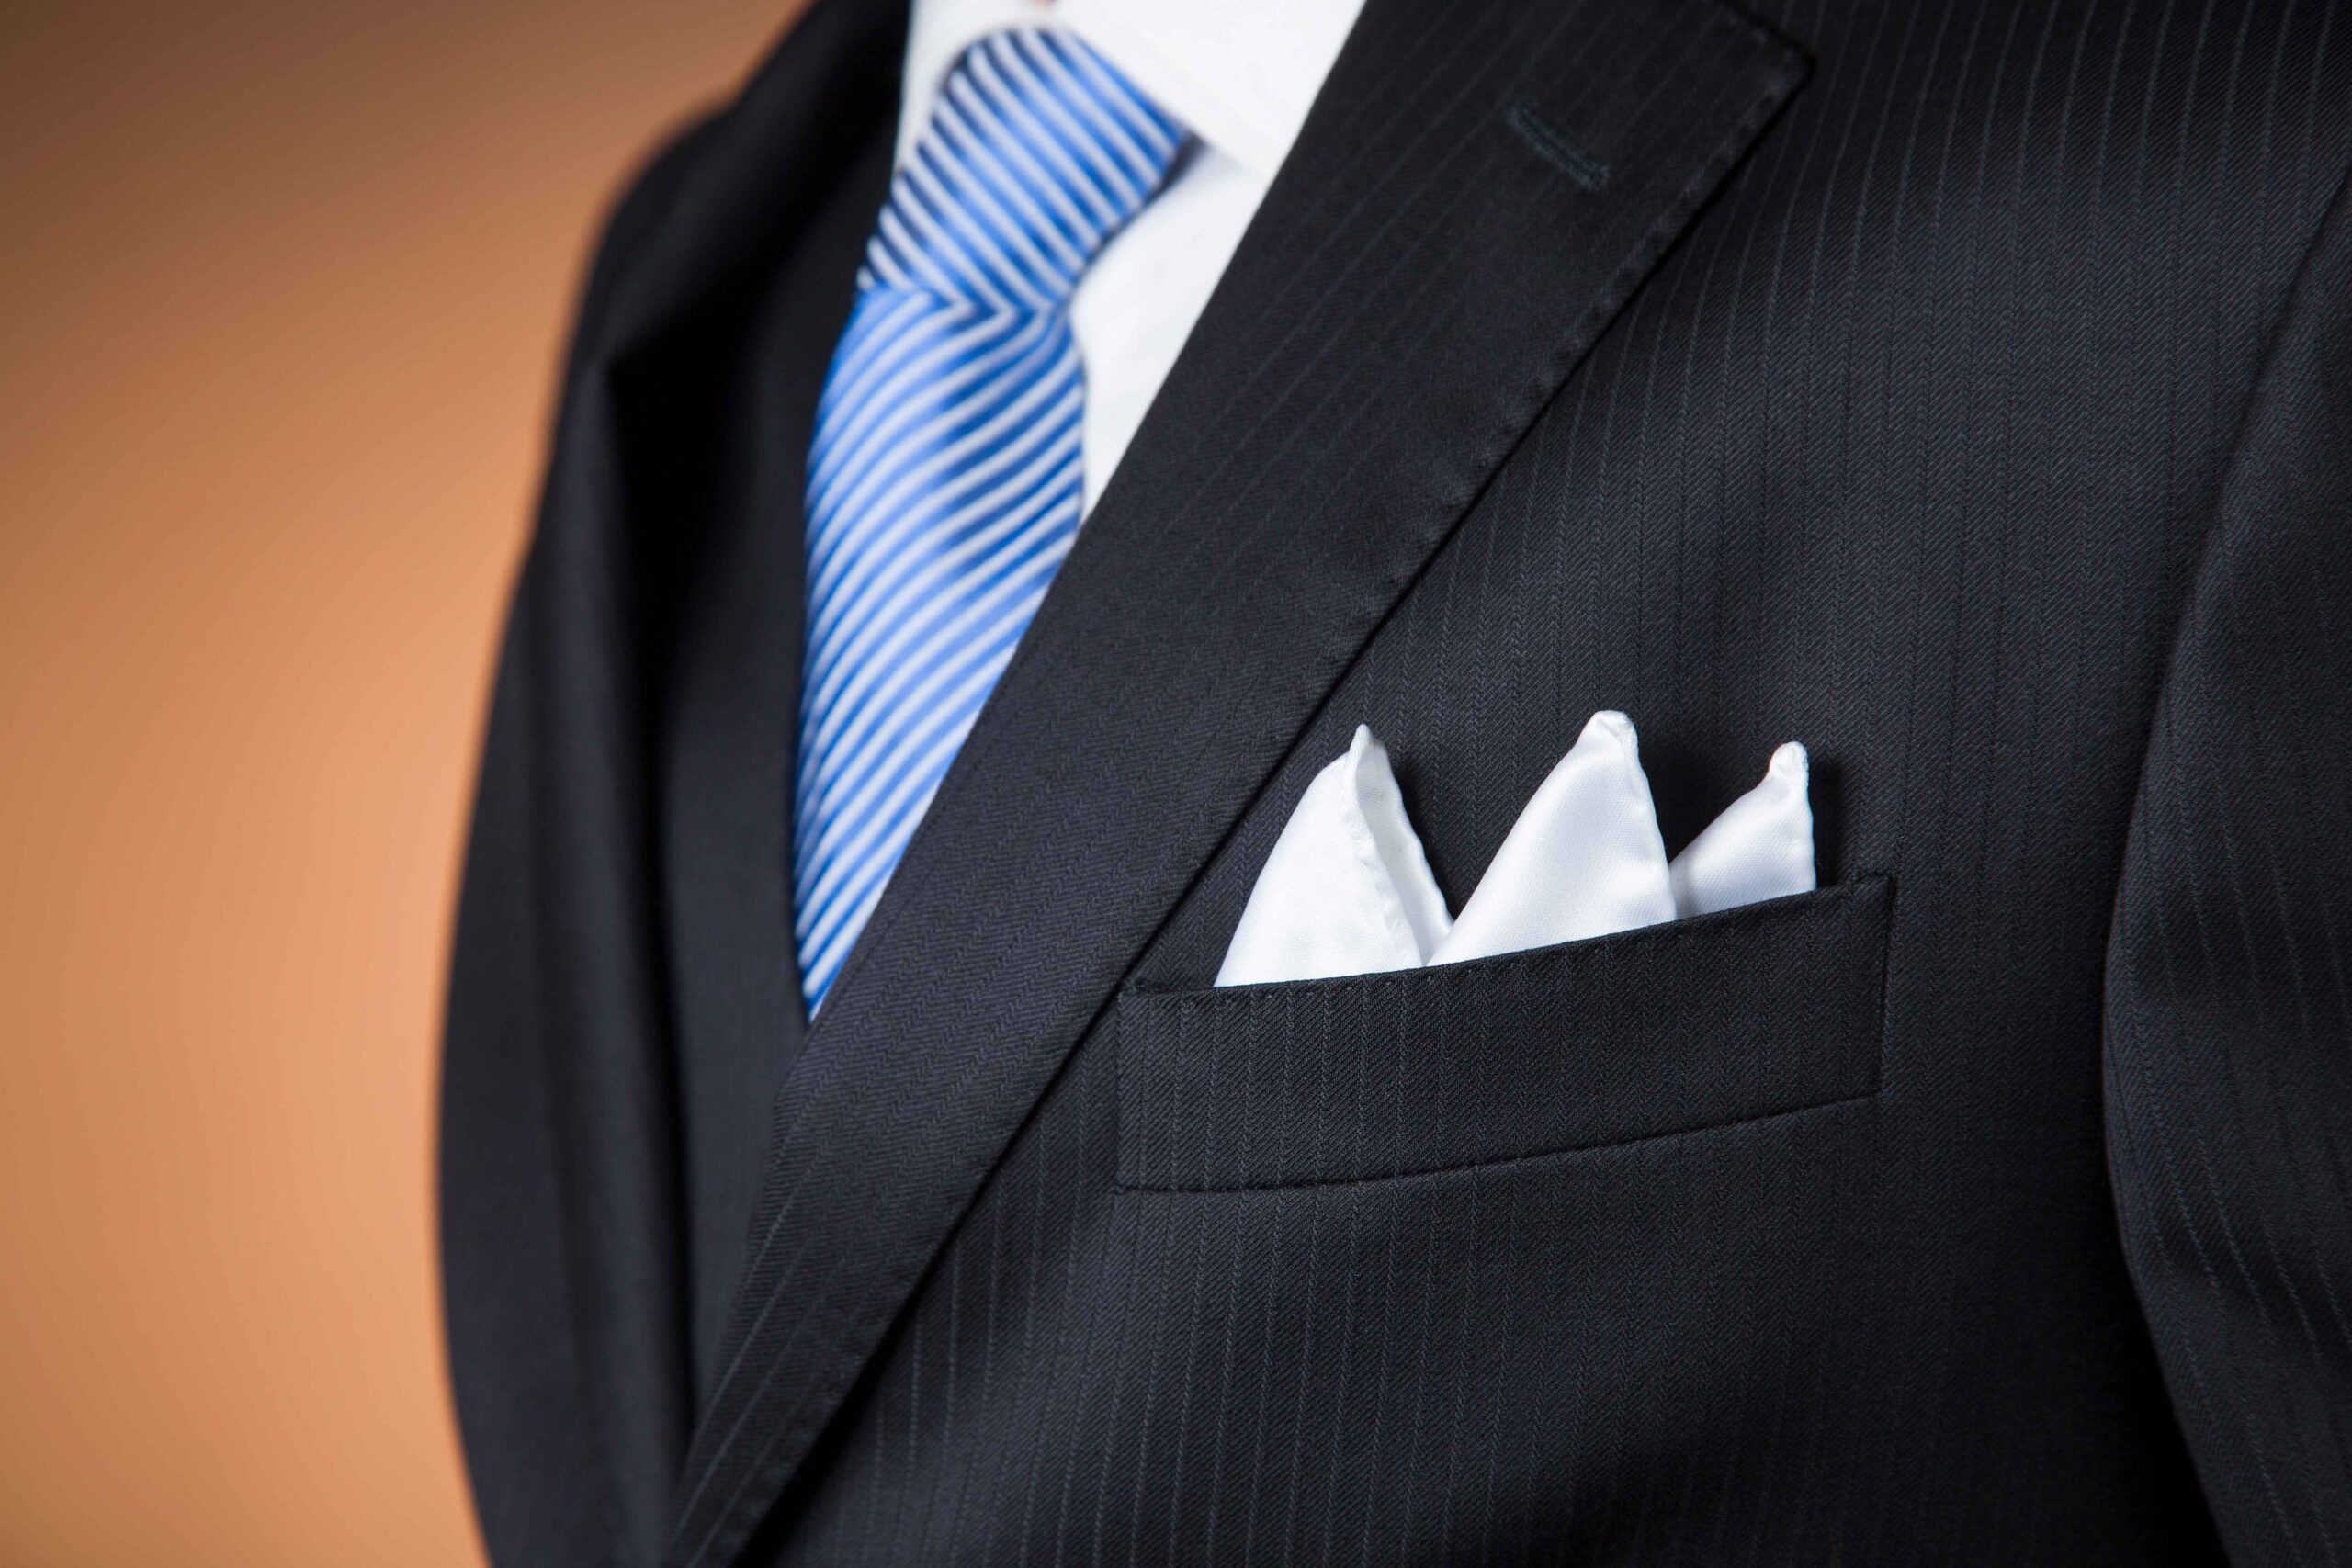 Men's pocket squares: how to choose and match the pocket handkerchief